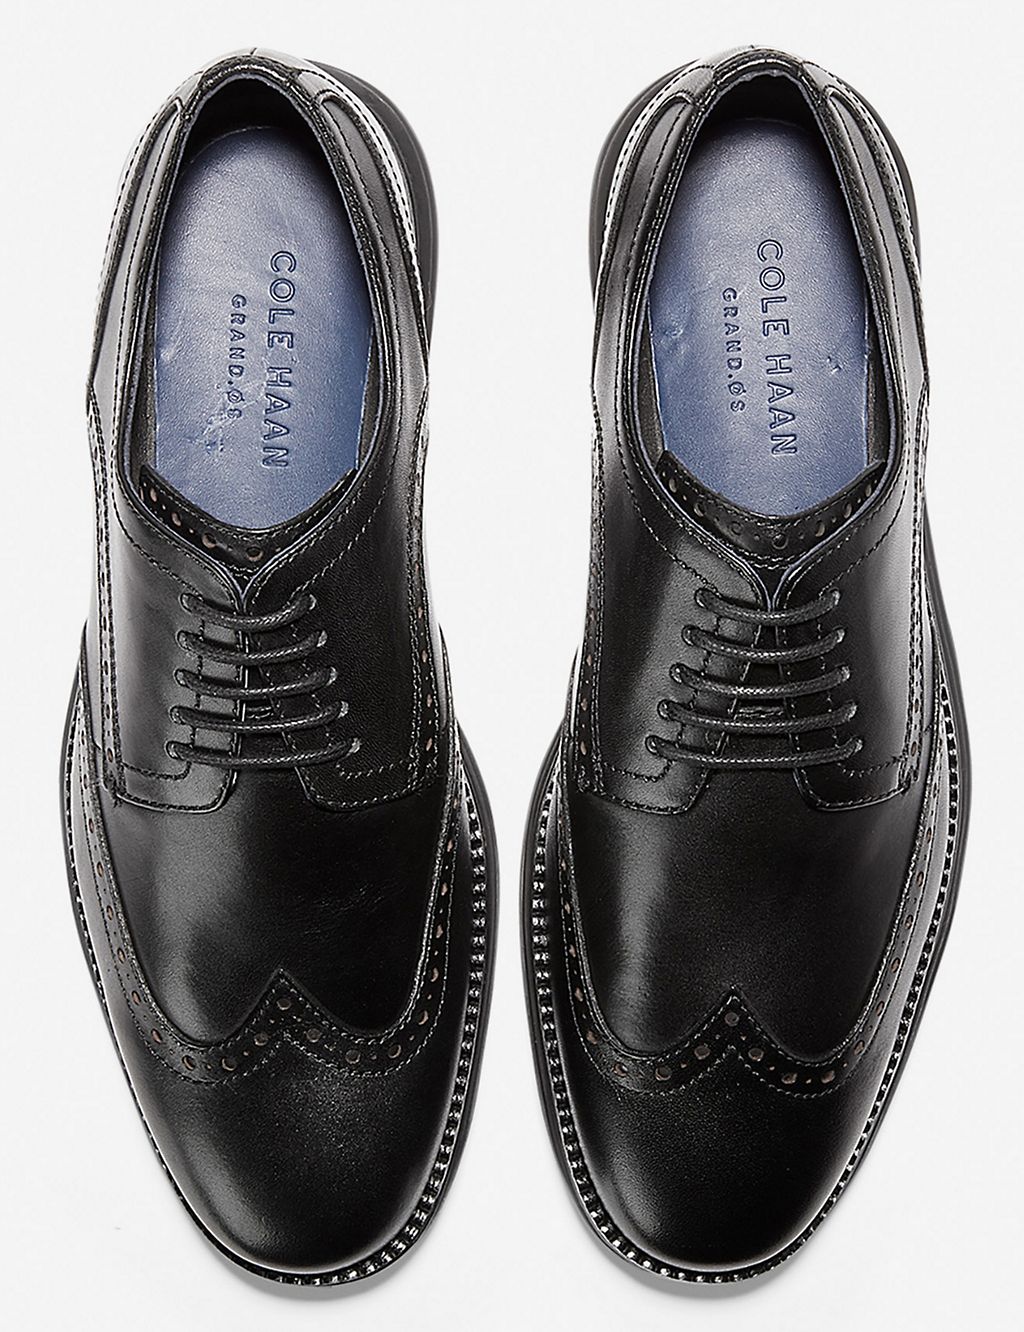 Originalgrand Leather Oxford Shoes 4 of 5